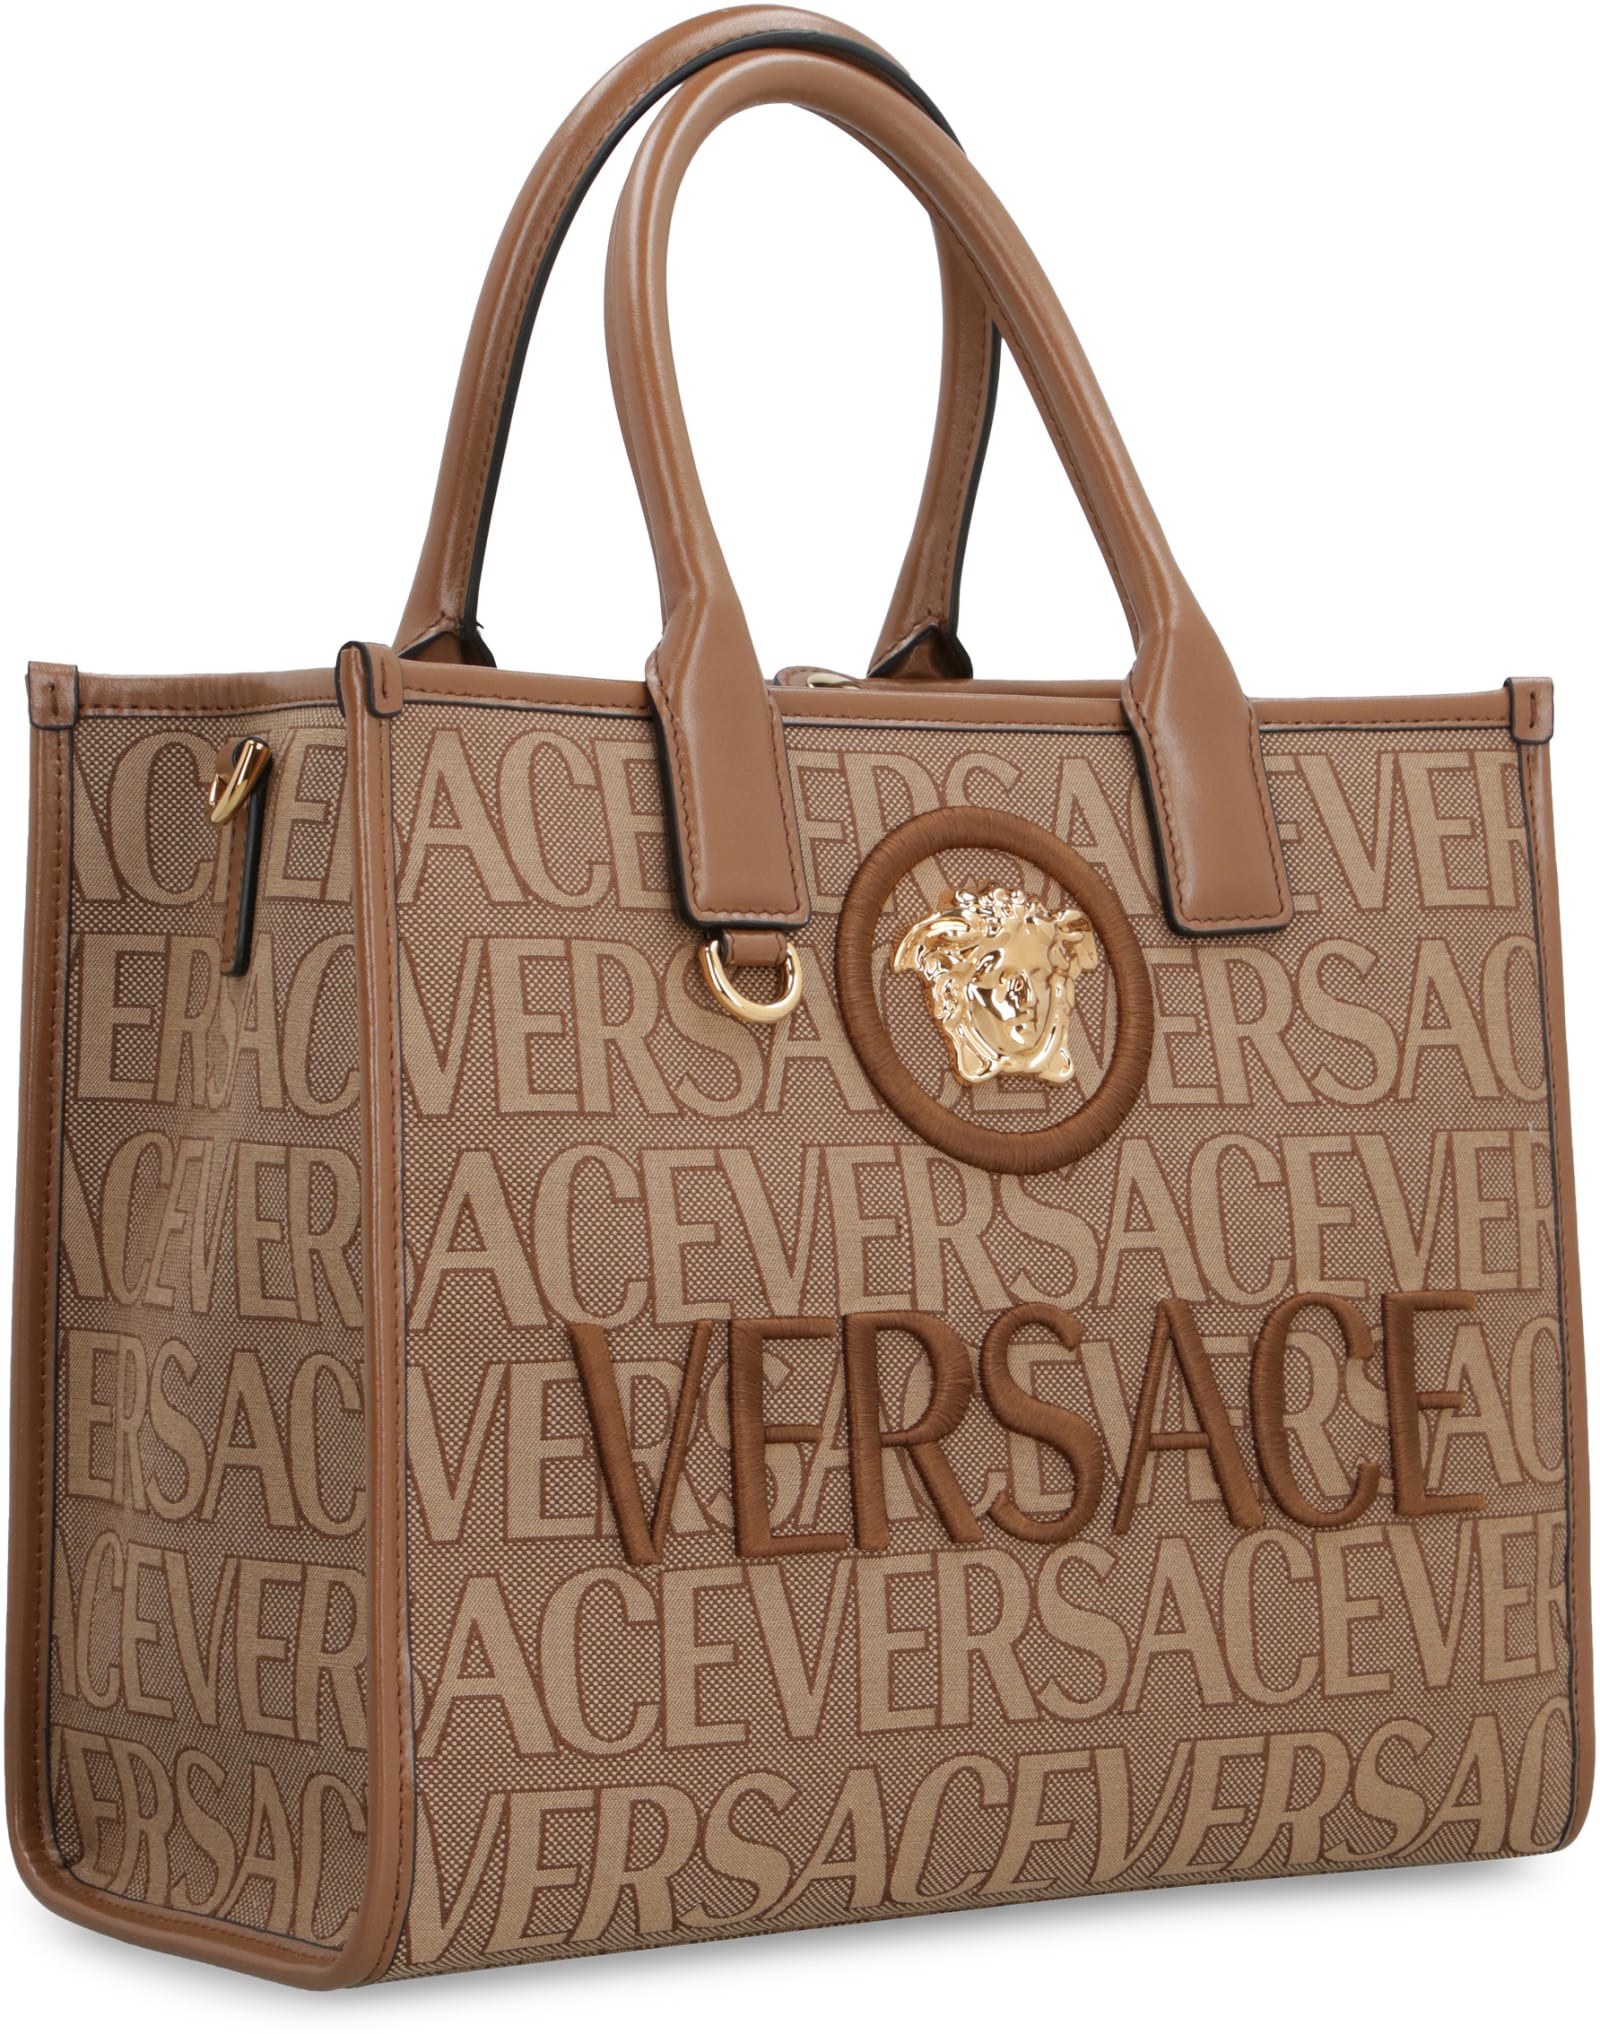 Versace Allover Large Tote Bag in Brown - Versace